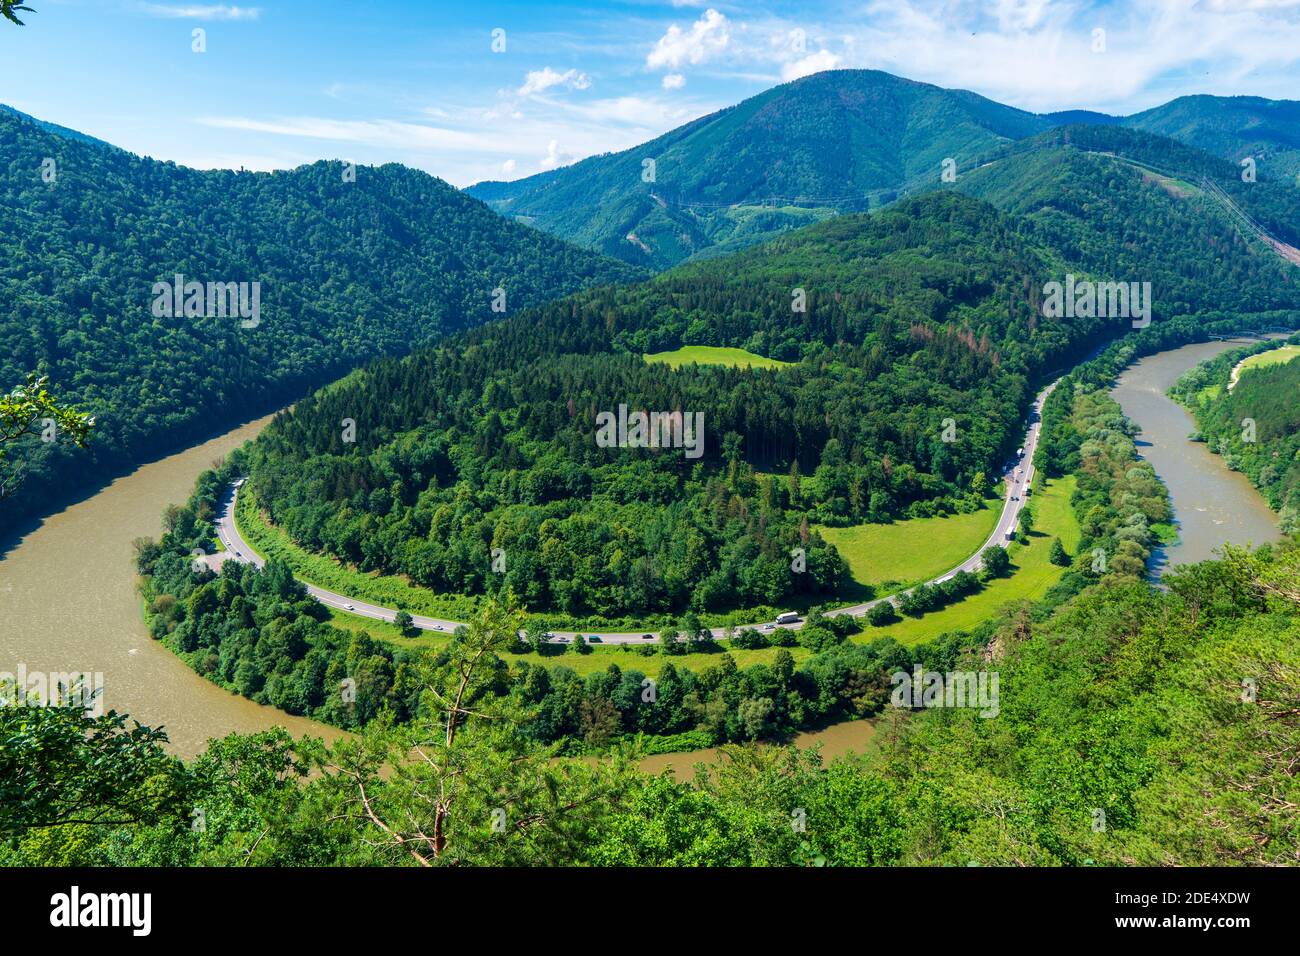 Meander of the river Váh, Slovakia. This meander is very similar to the canyon of the Colorado River in the United States. Stock Photo